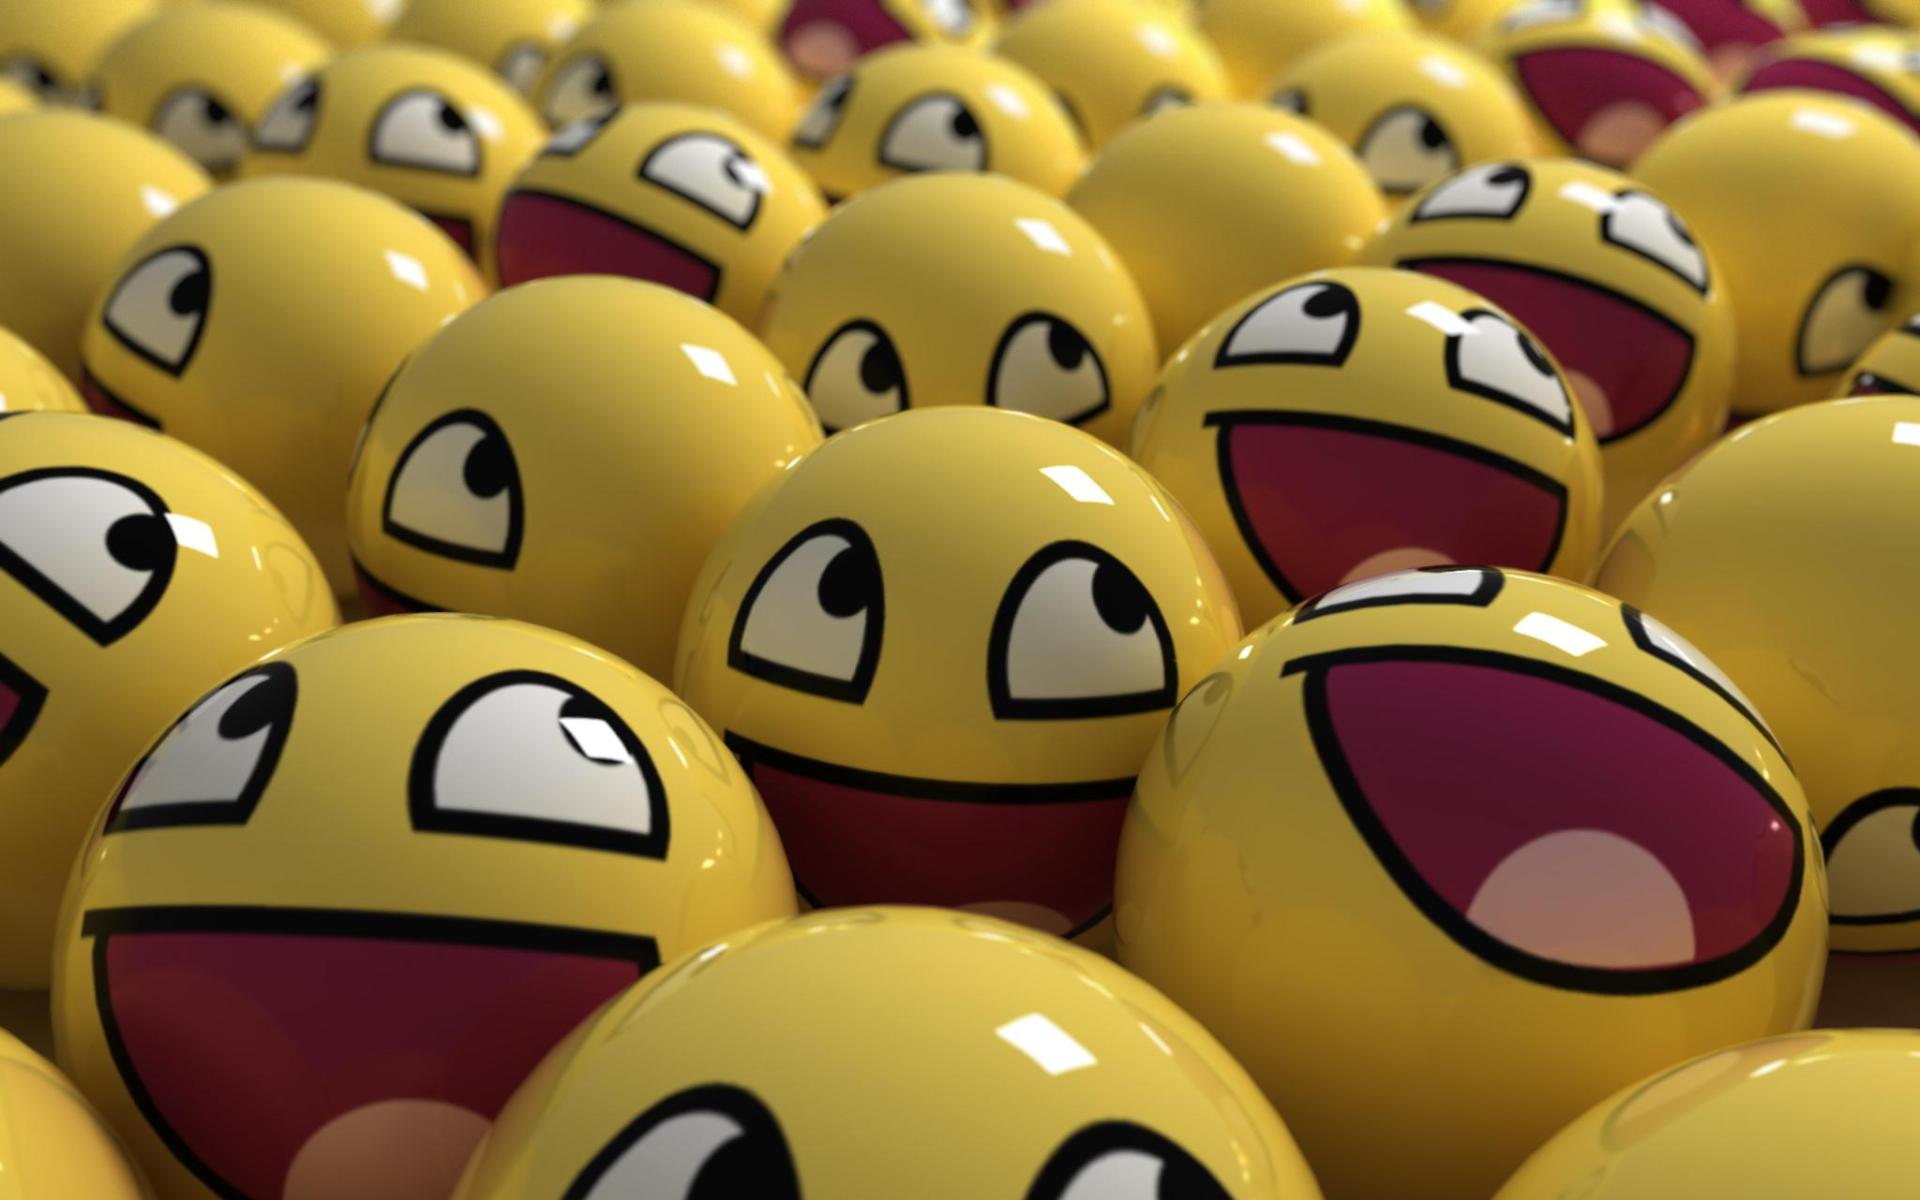 Funny Smiley Faces, awesome, balls, 1920x1200 wallpaper